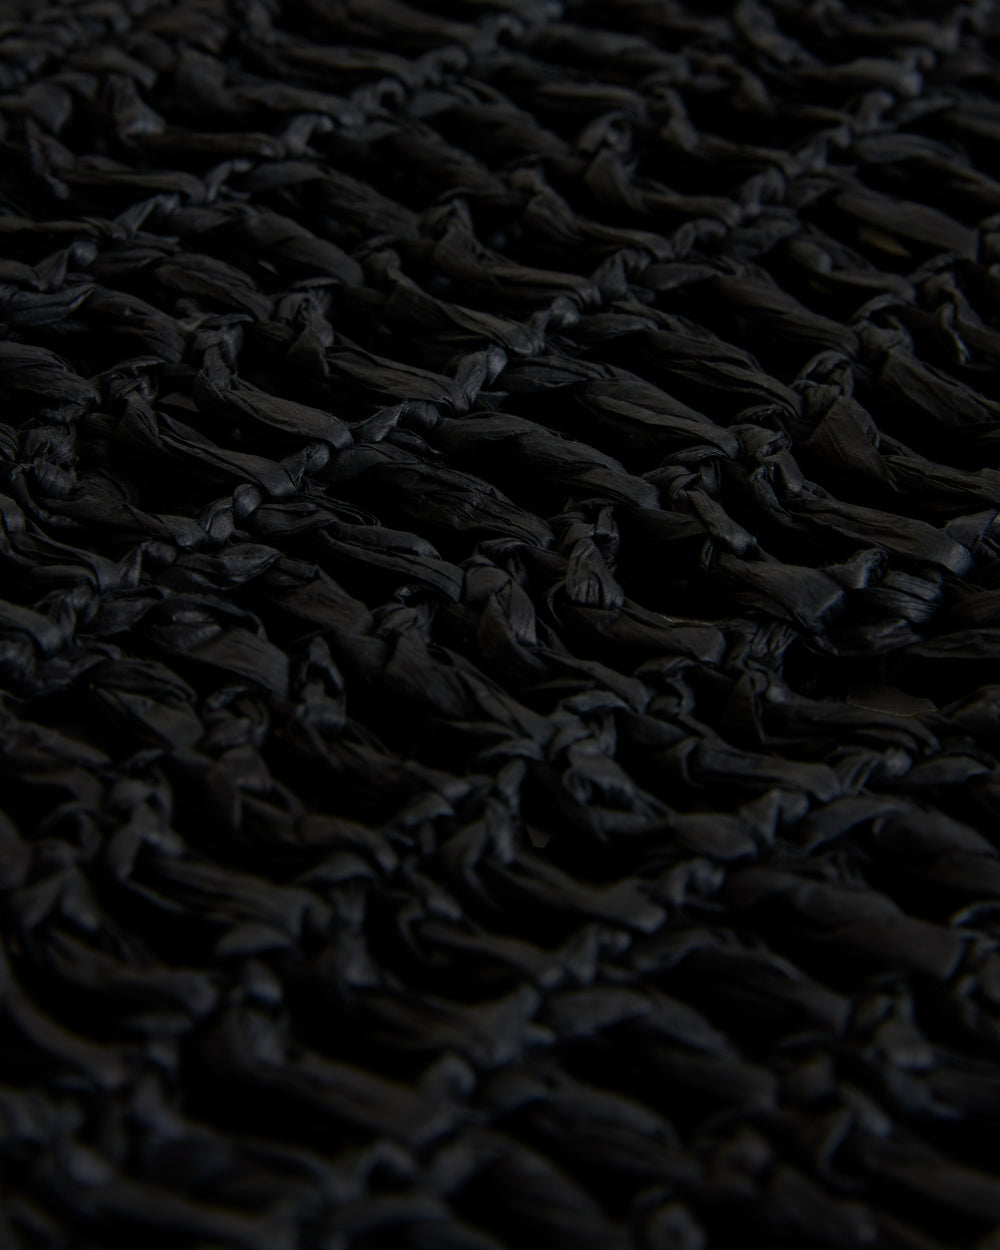 Close-up of The Amabile Rafia Bag - Onyx from Dandy Del Mar, a textured black fabric with intricate woven patterns.